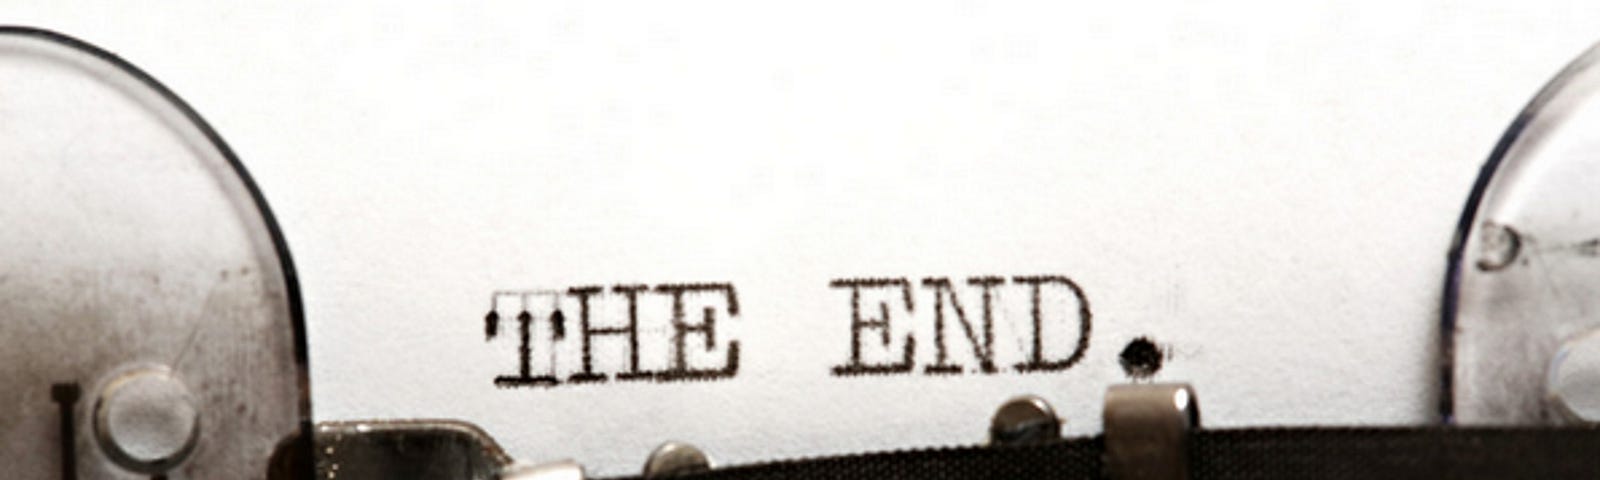 Photo of typewriter with the end — text on page